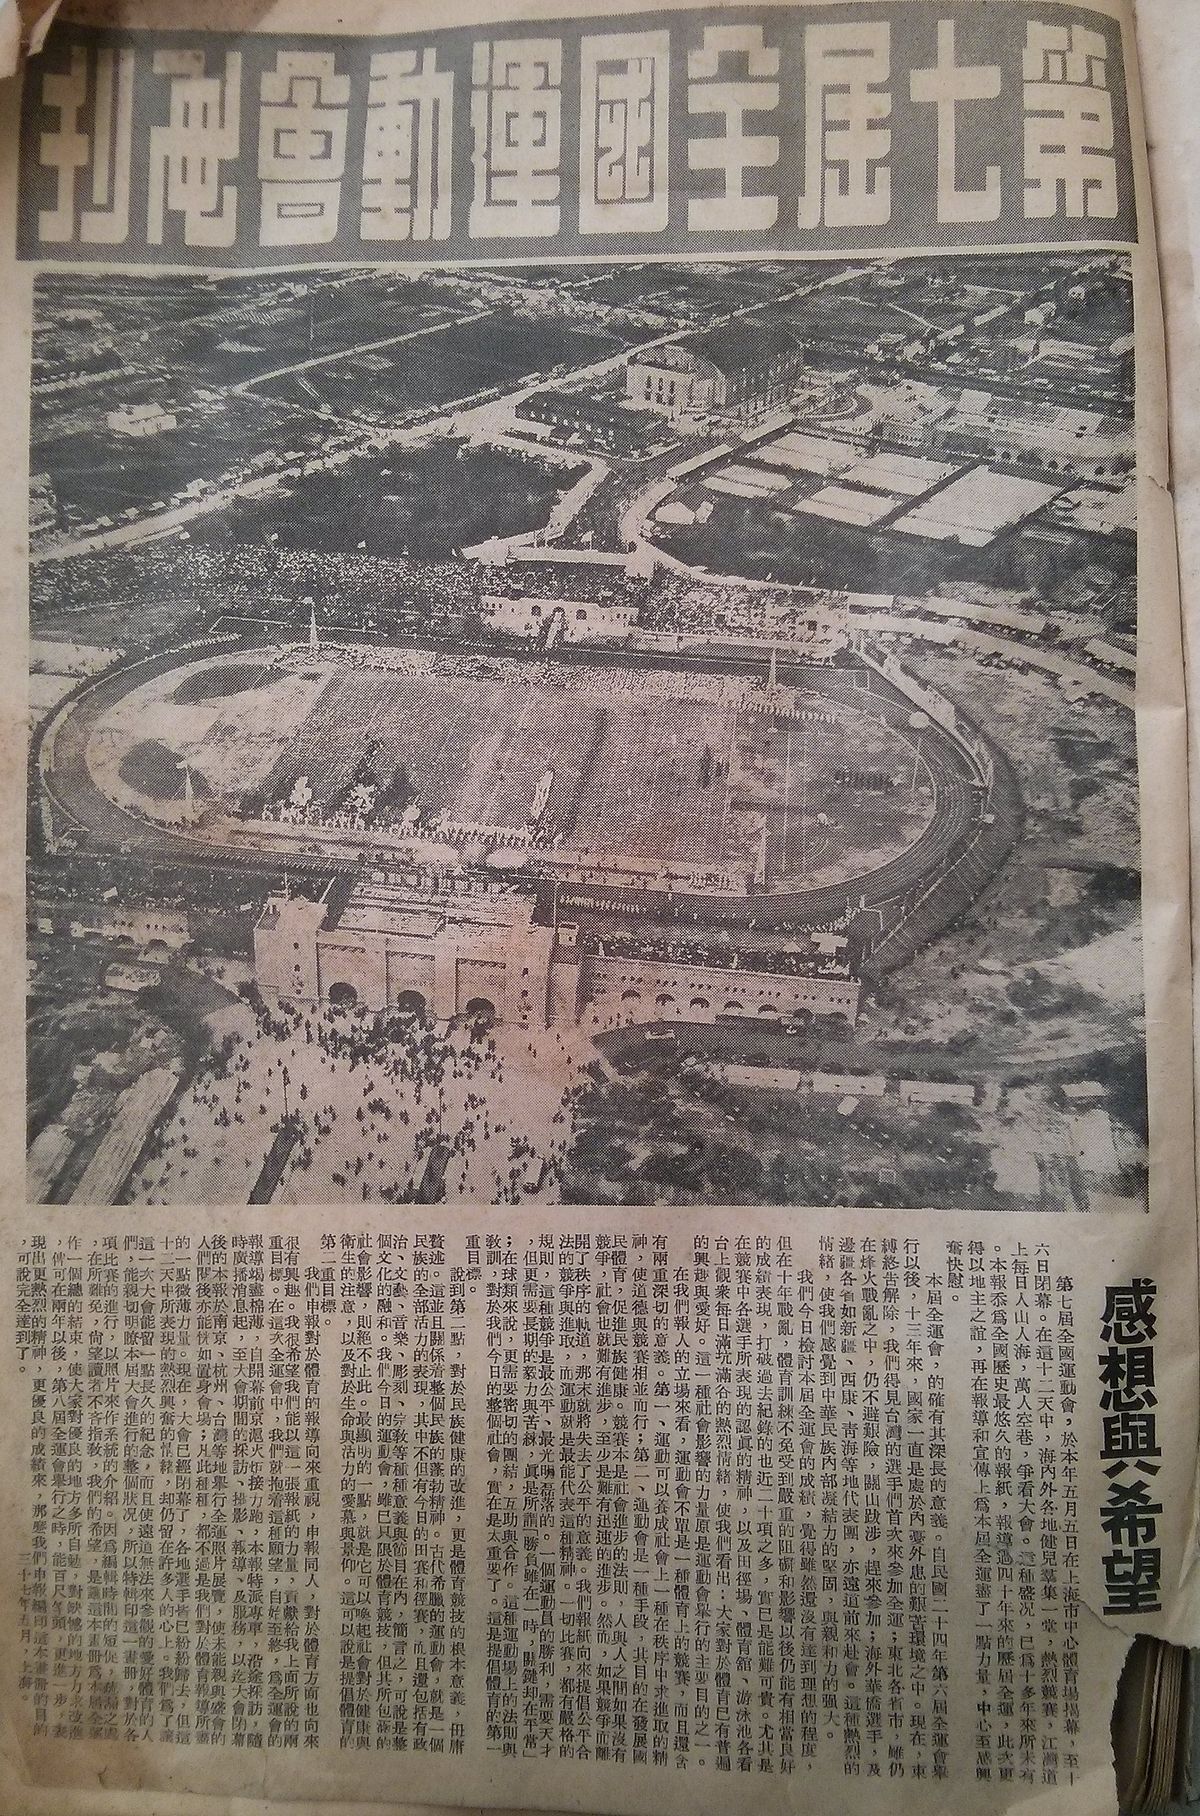 File:Newspaper(Shun Pao) about The 7th National Games of the 